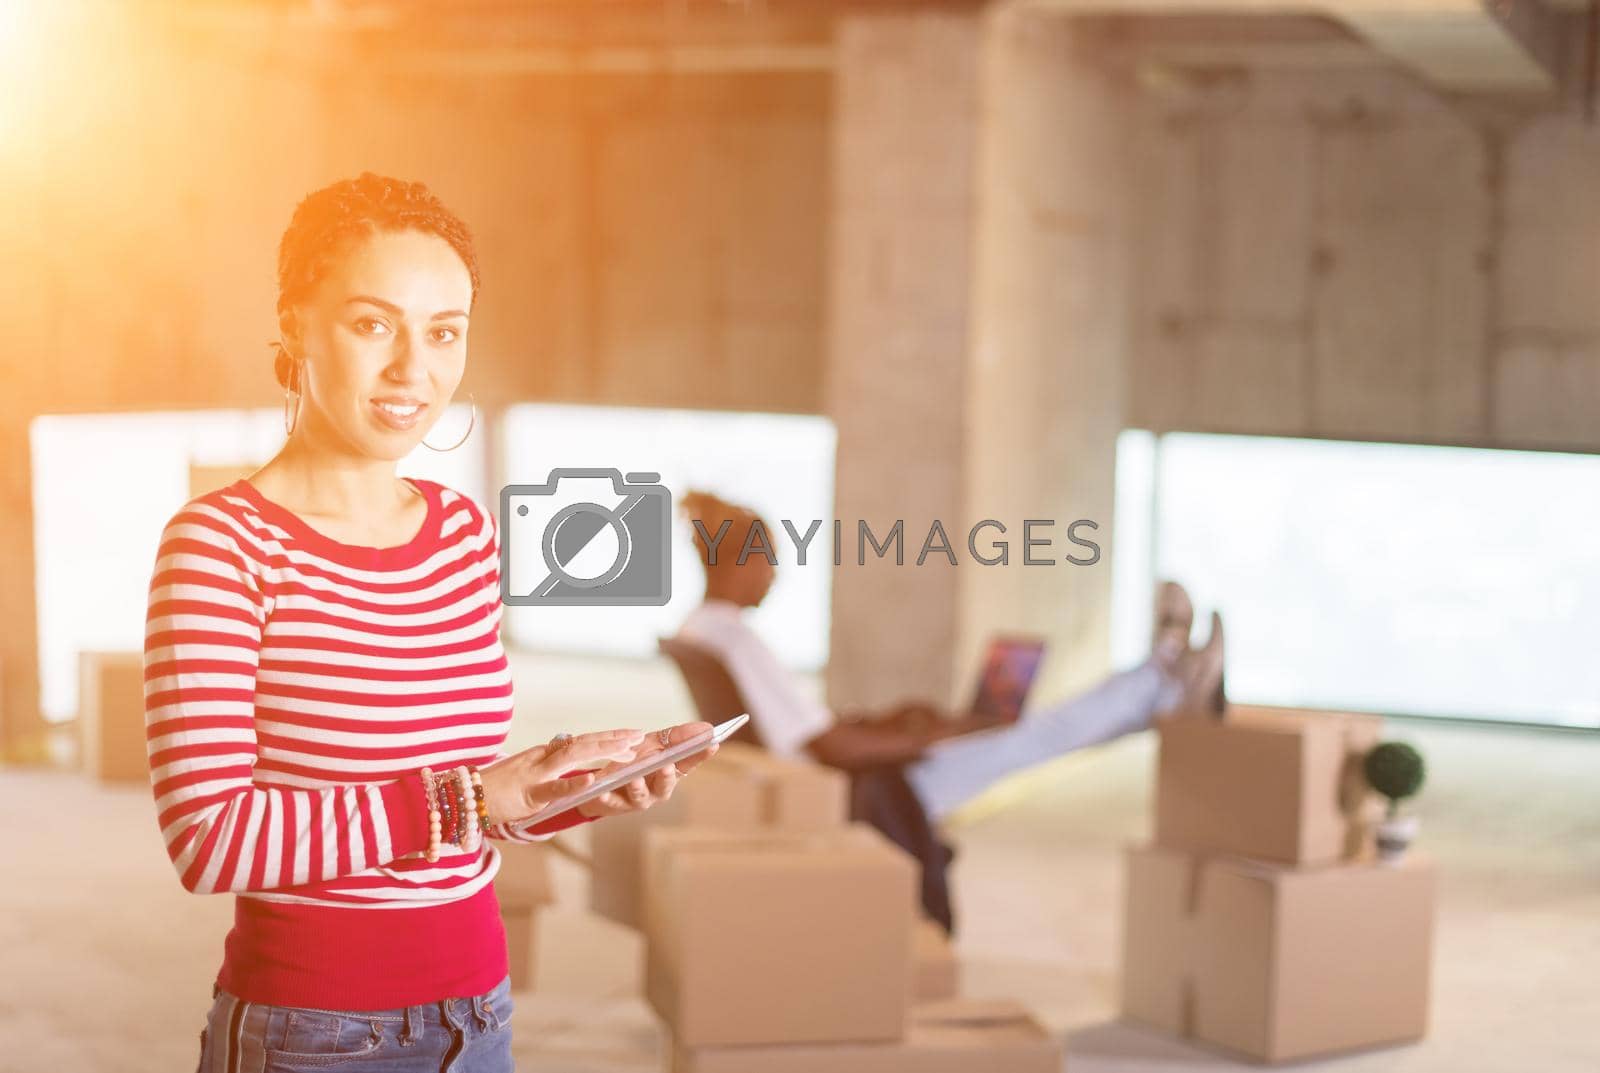 Royalty free image of modern muslim business woman on construction site by dotshock